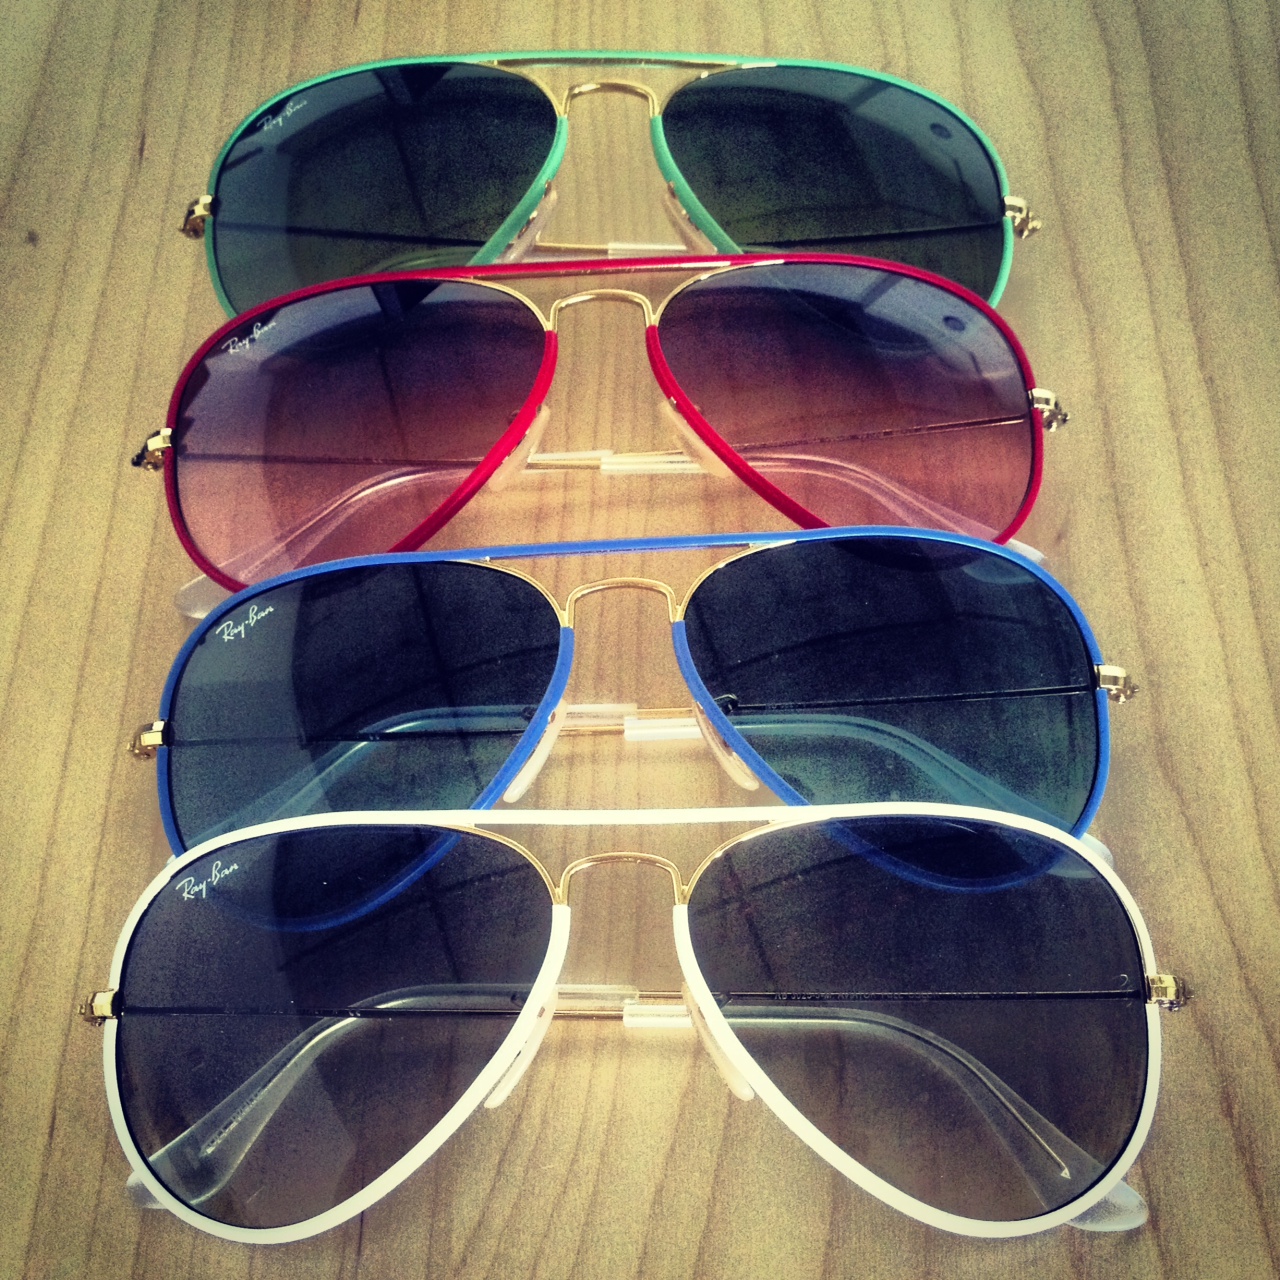 ray ban full color